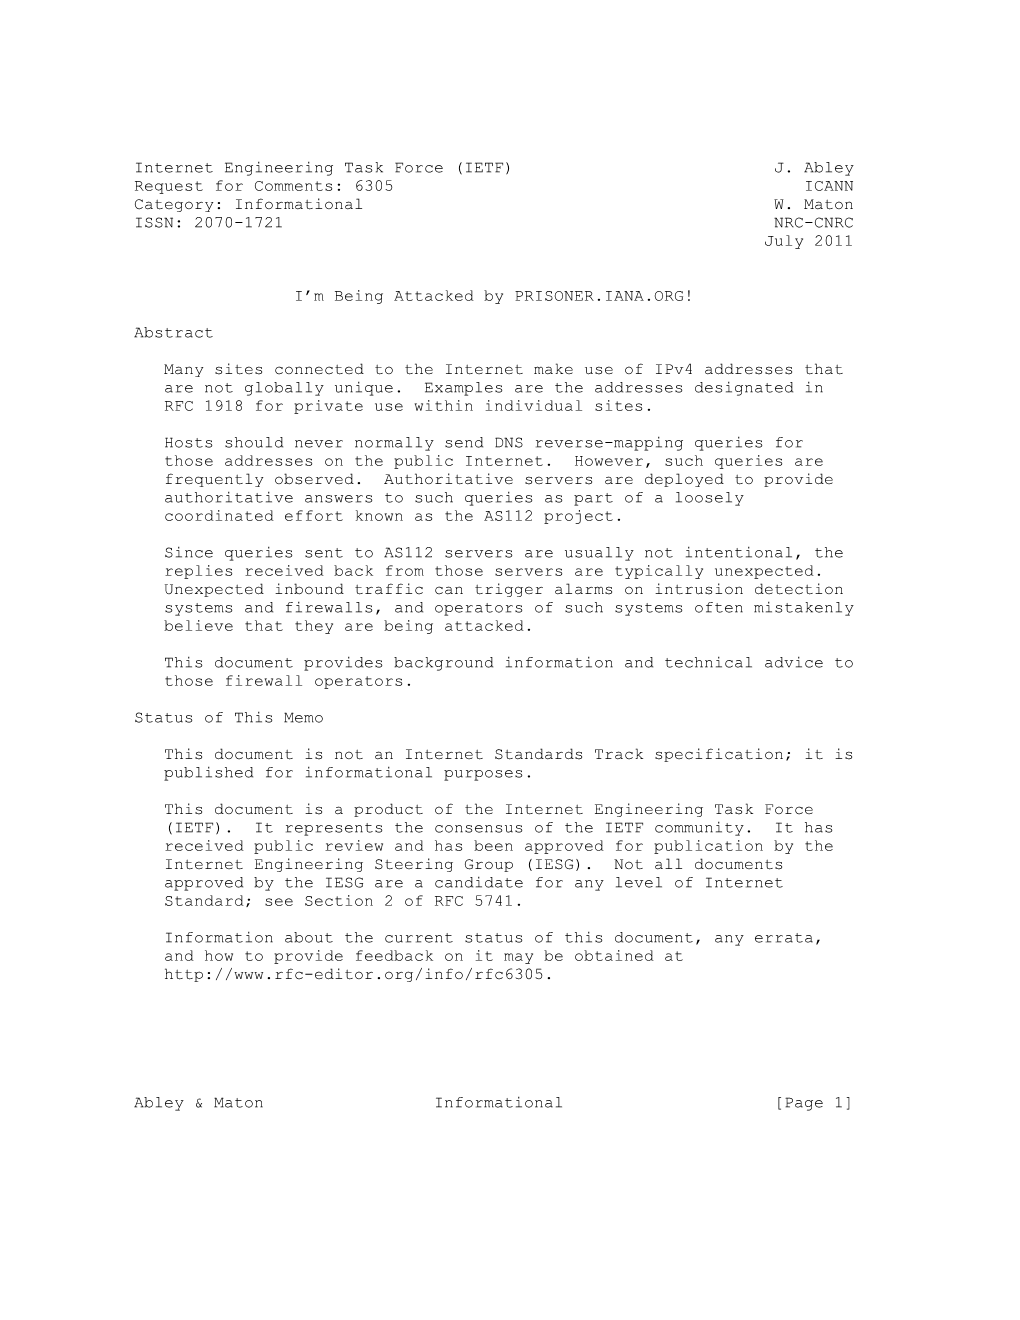 Internet Engineering Task Force (IETF) J. Abley Request for Comments: 6305 ICANN Category: Informational W